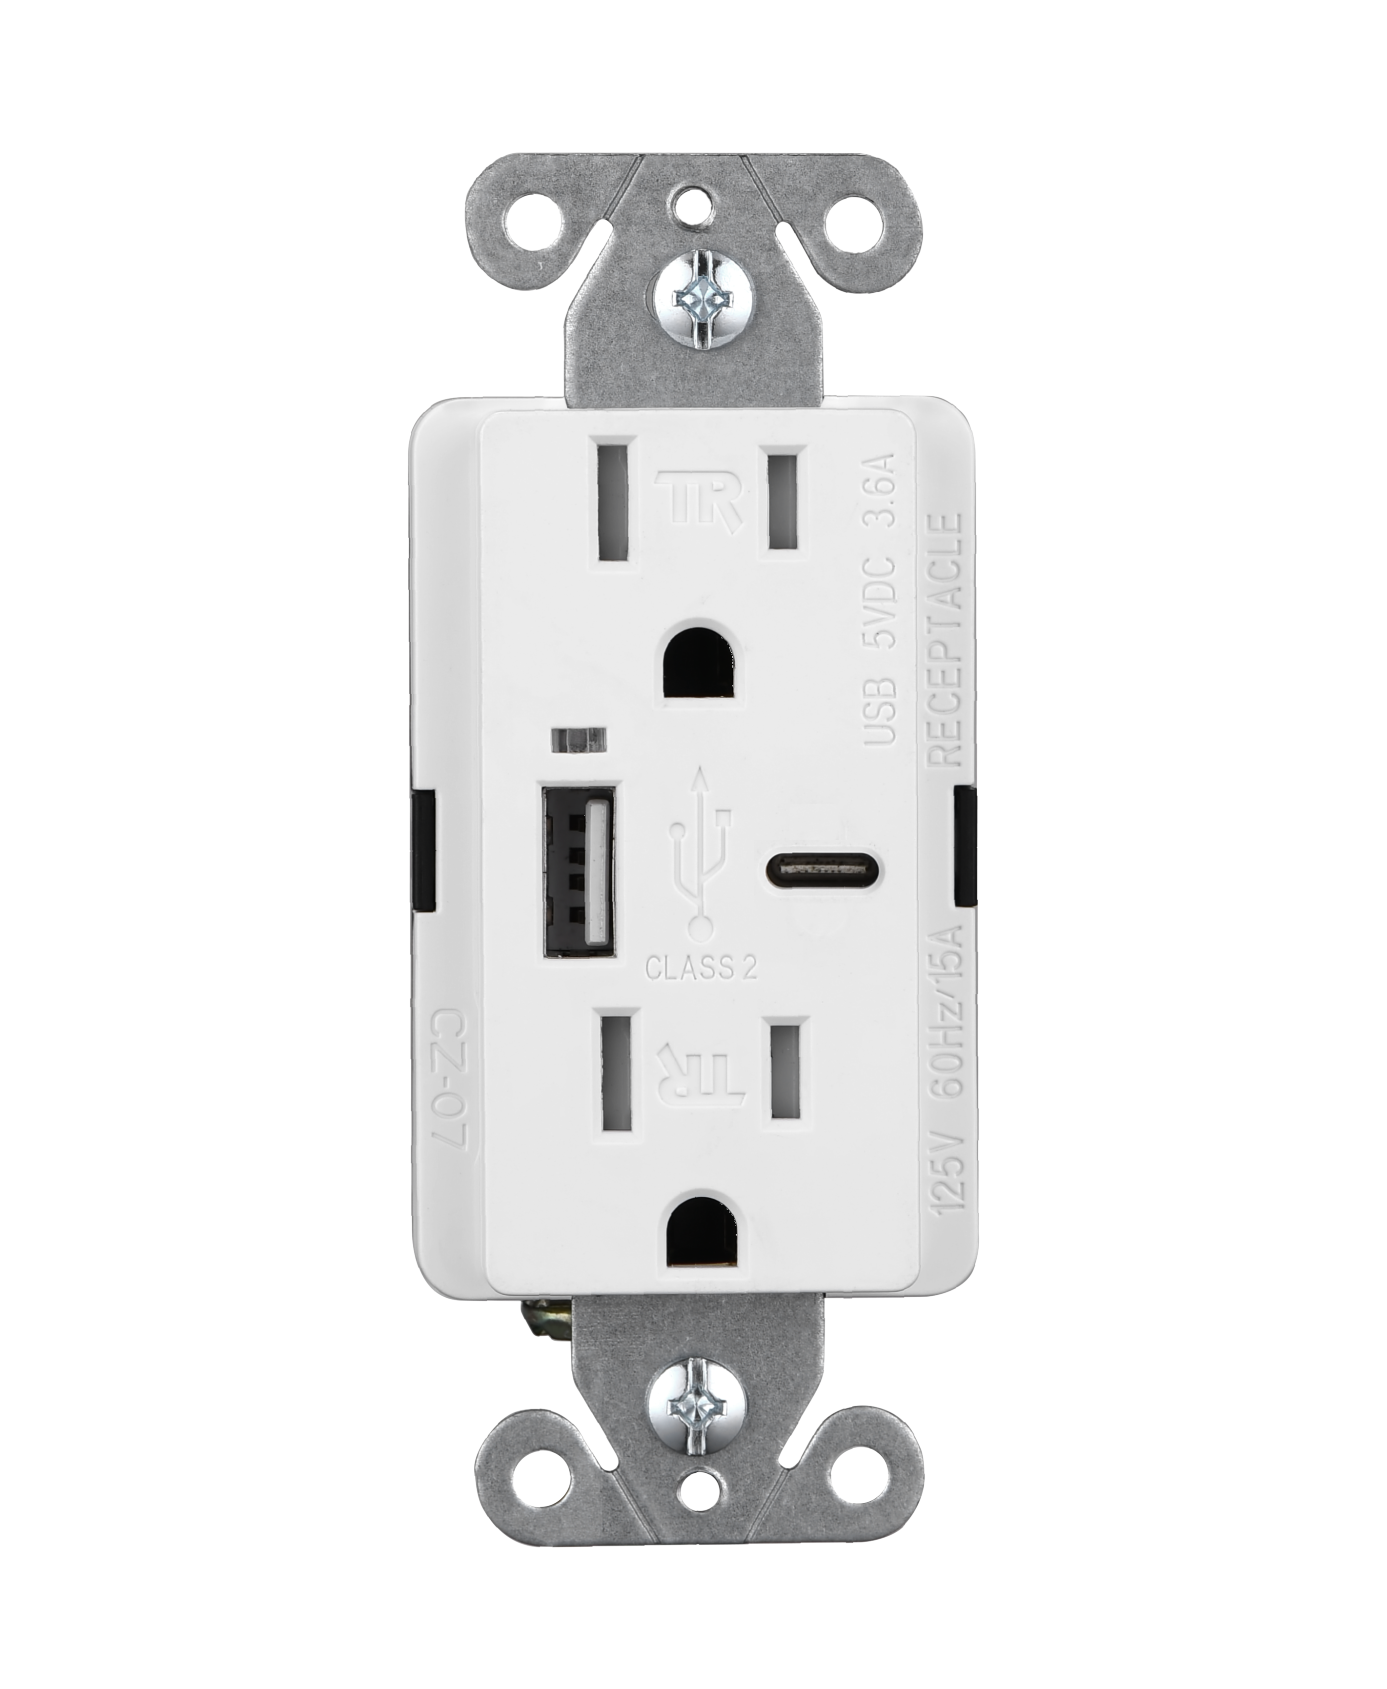 Excellent quality Outlet Expander - USB Wall Outlets CZ-07 – Faith Electric